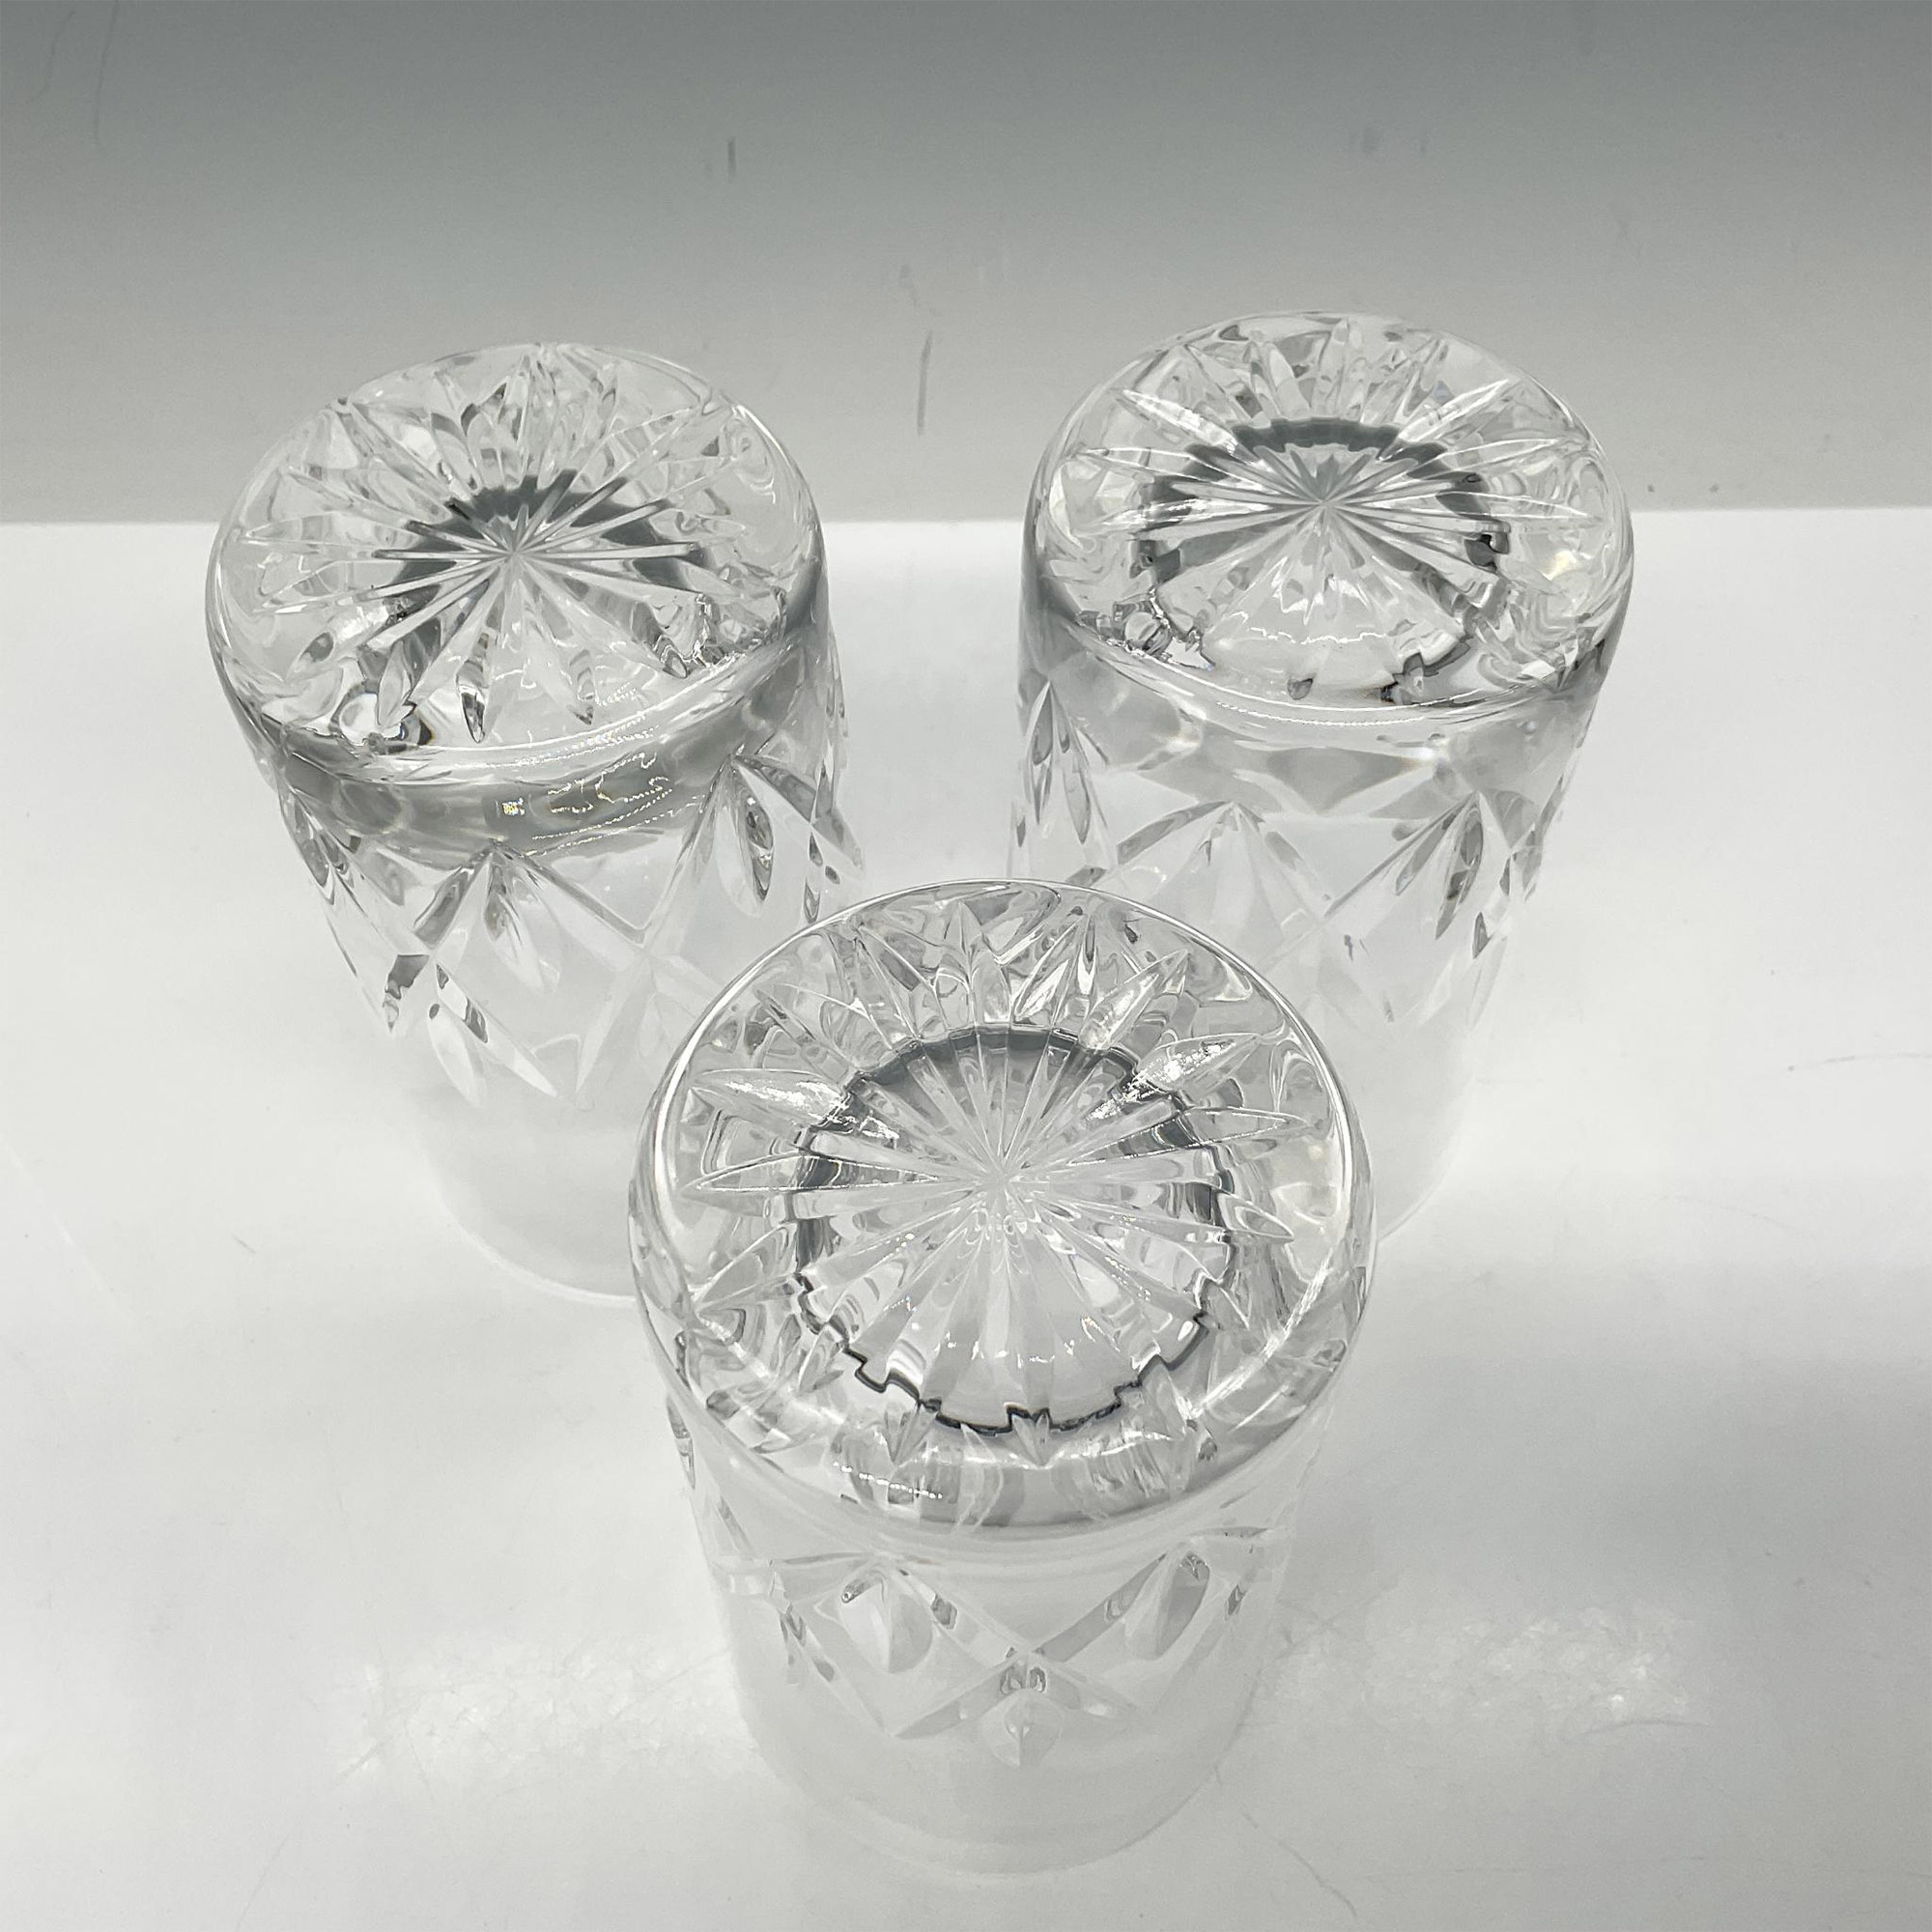 3pc Waterford Crystal Highball Glasses - Image 3 of 3